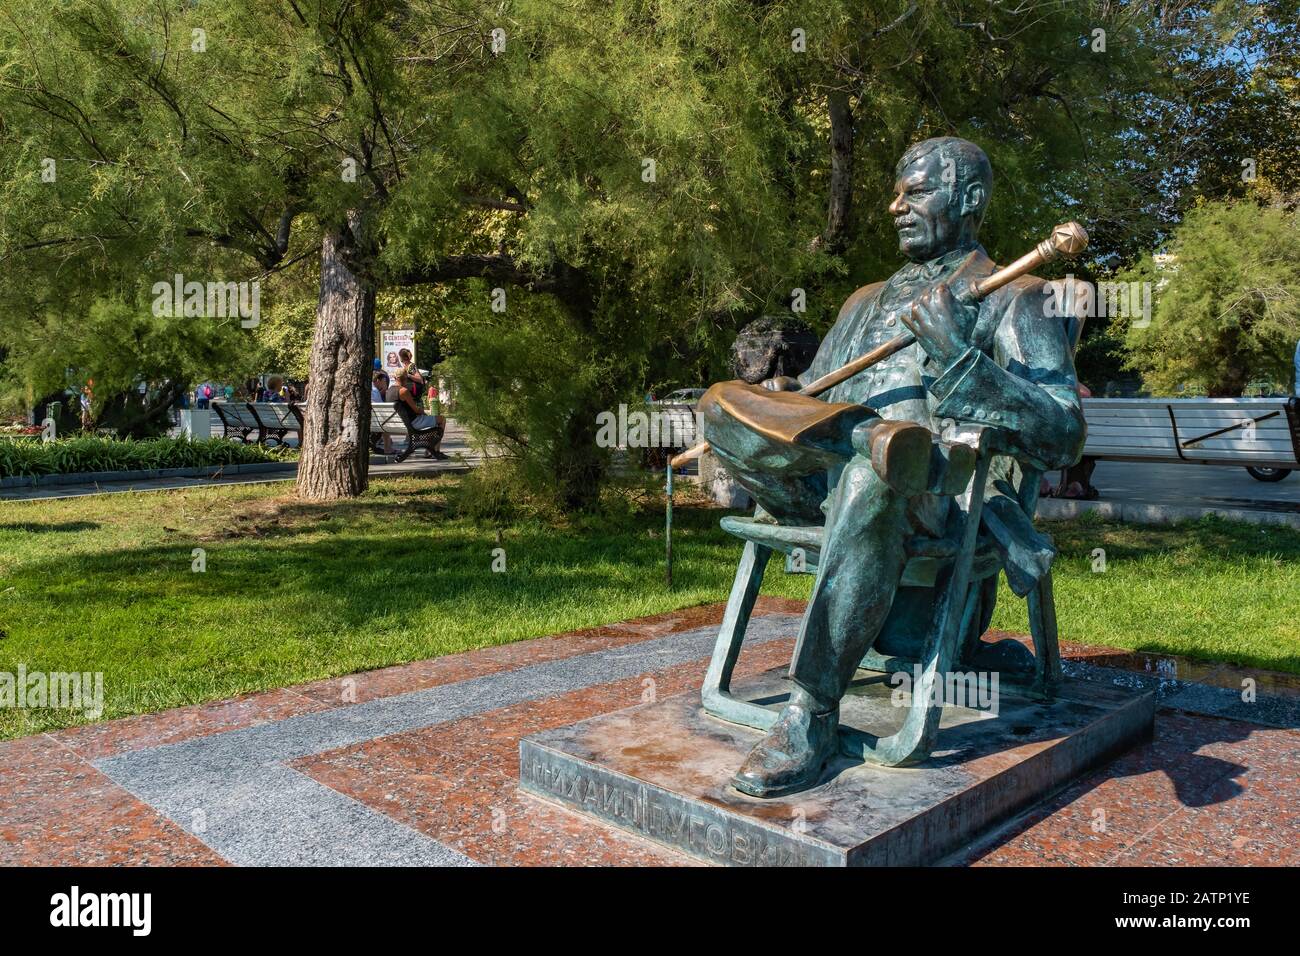 Monument to Soviet and Russian theater and film actor Mikhail Pugovkin in Yalta, Crimea. Stock Photo